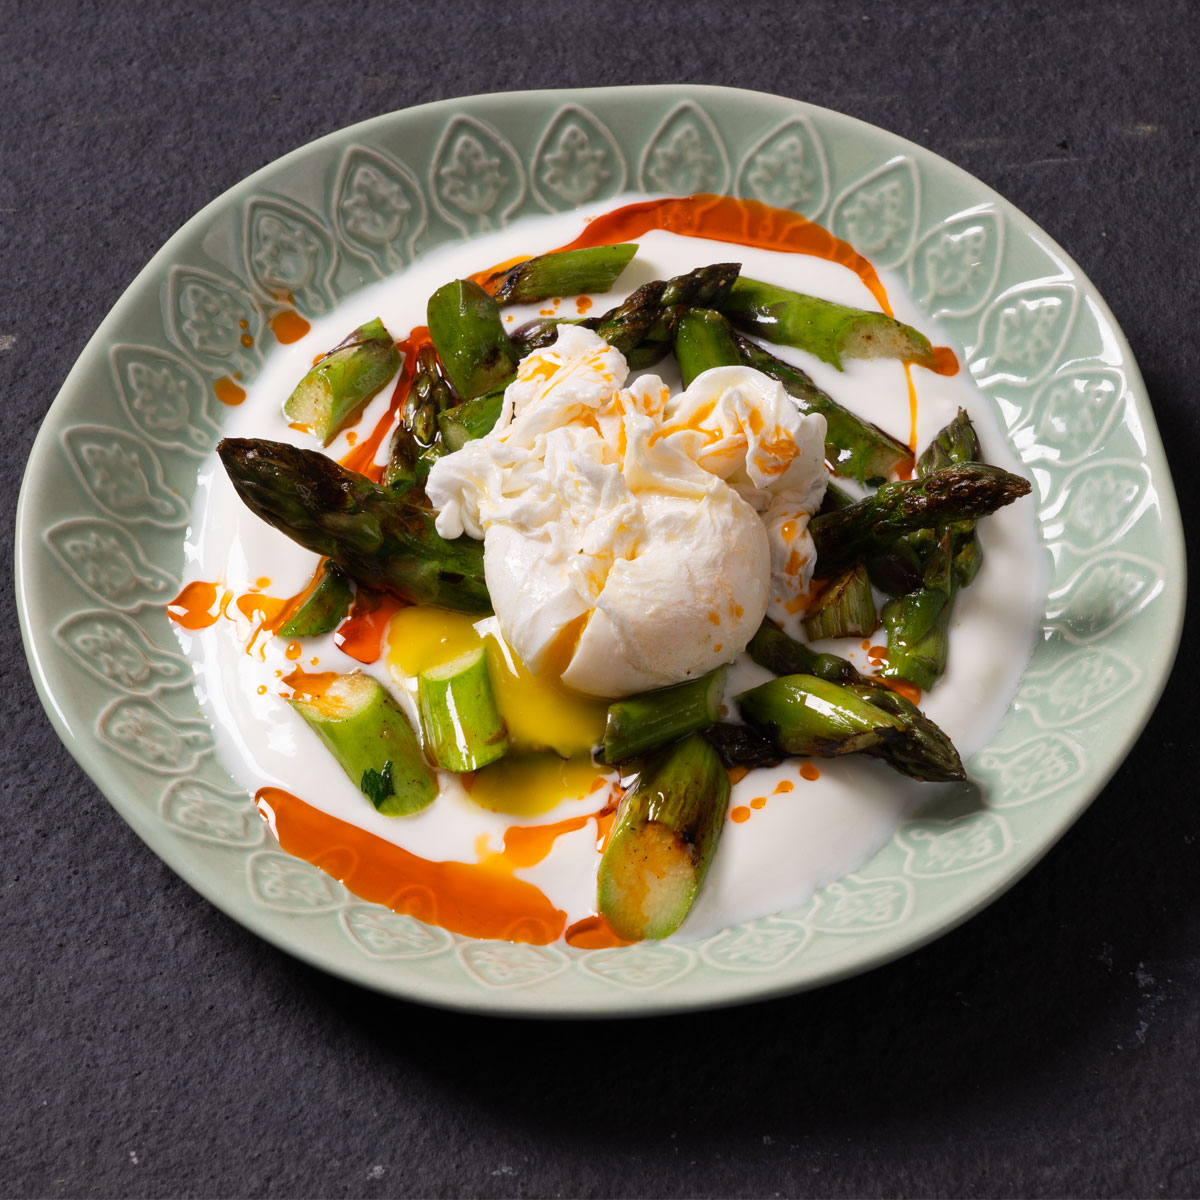 Green asparagus with yoghurt and poached egg